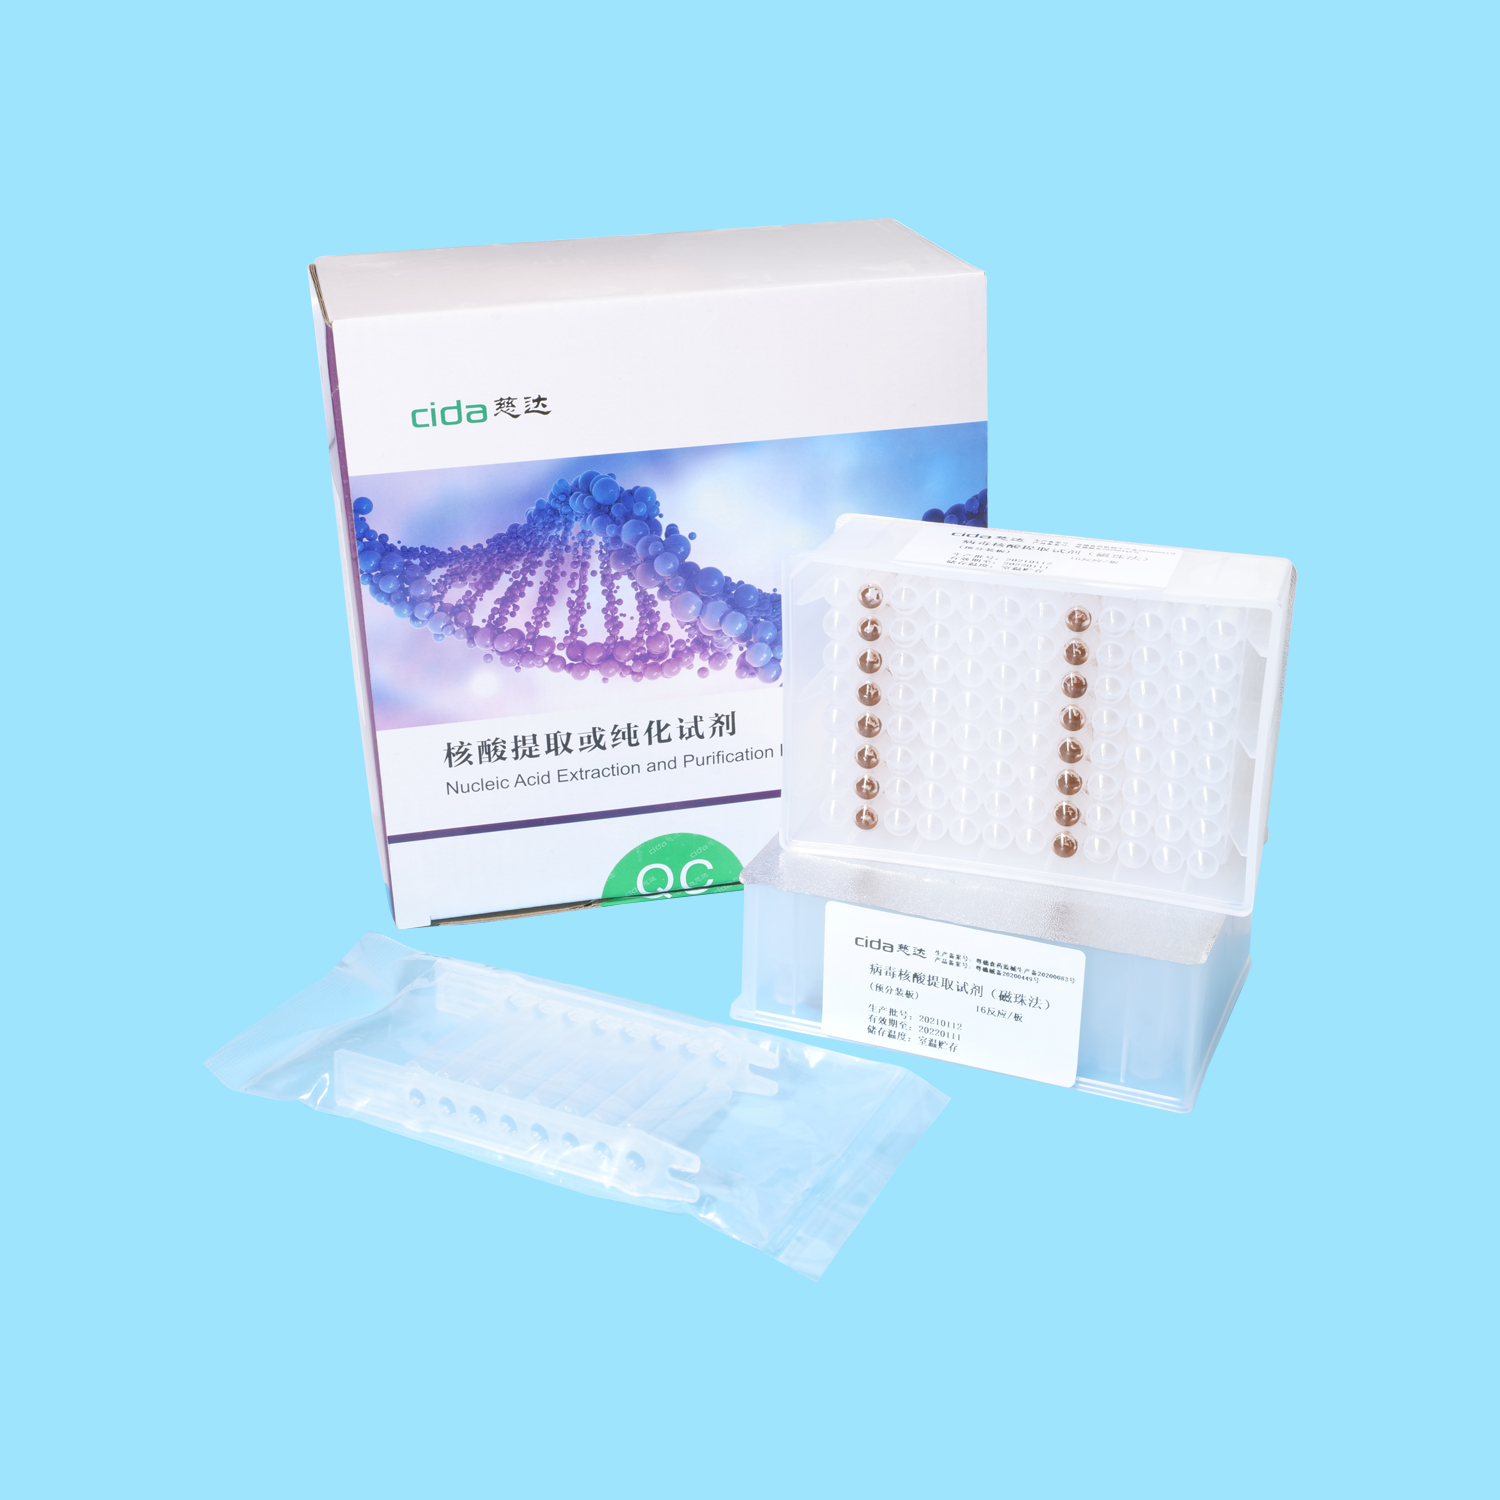 Nucleic Acid Extraction and Purification Kit